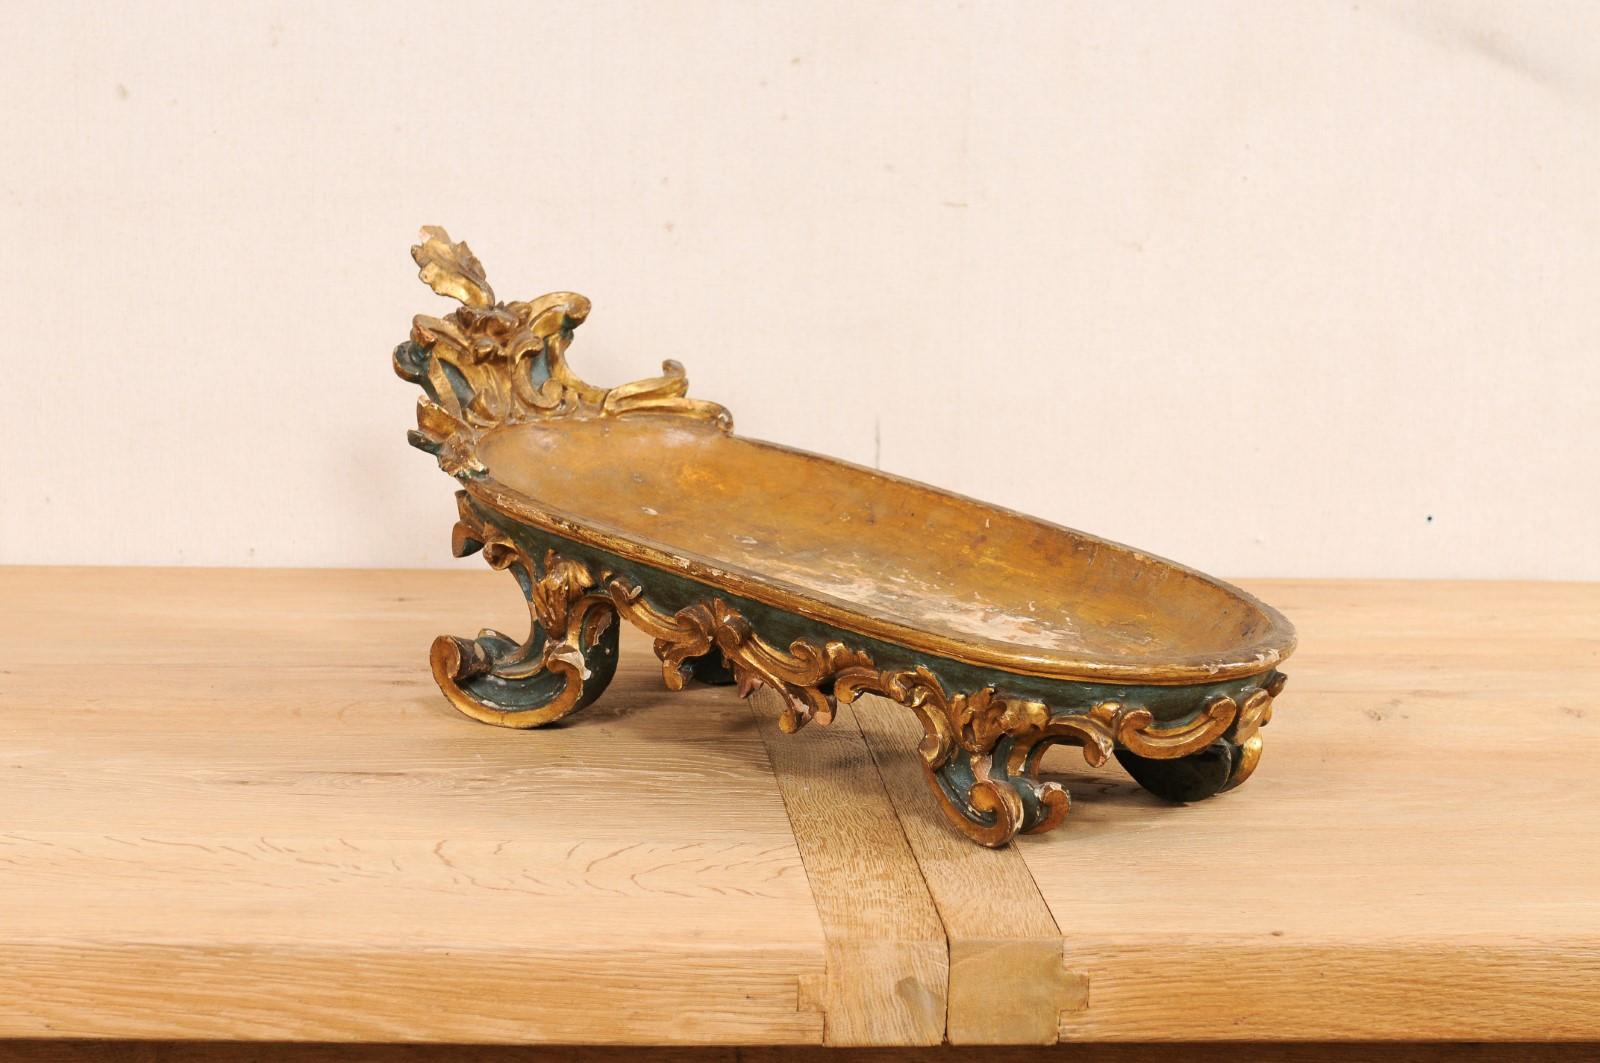 An Italian carved and painted wooden bowl for display, from the turn of the 18th and 19th century. This antique bowl from Italy is oblong in shape, with front end/head tilted upward. The body is embellished with carved acanthus leaves and c-scrolls,